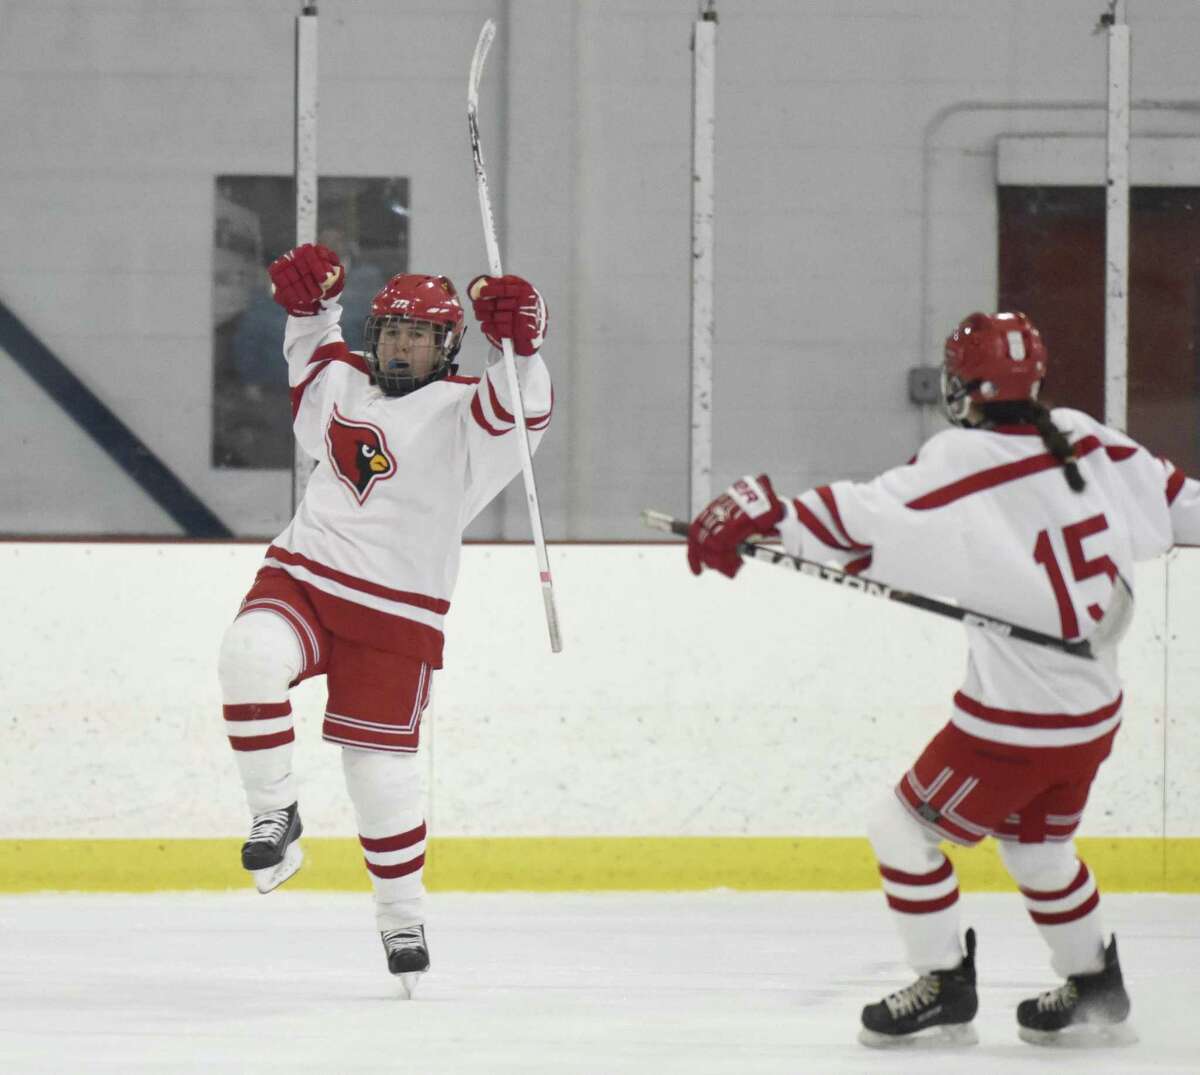 Greenwich’sJen Kelly, left, celebrates her goal with teammate Katie Piotrzkowski on Monday at Dorothy Hamill Skating Rink in Greenwich.